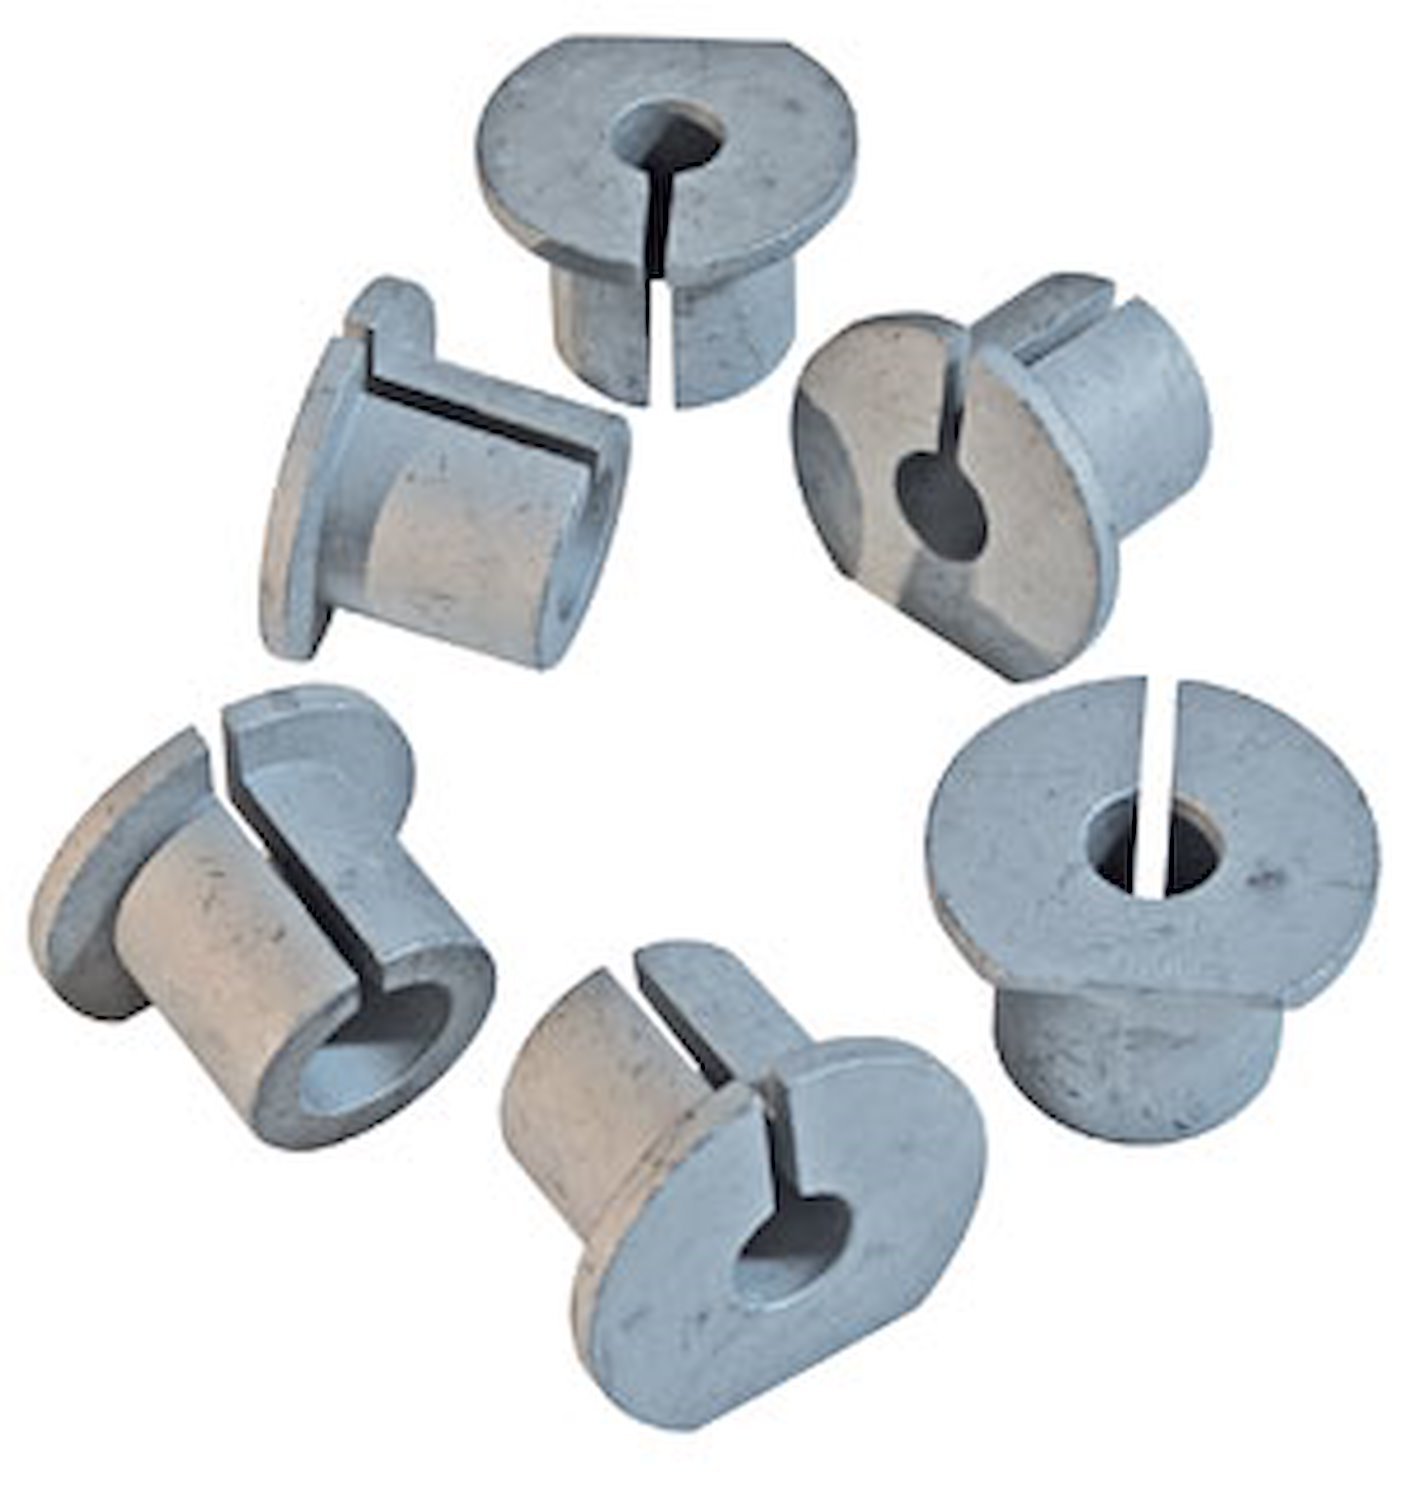 Camber Sleeve Adjusters-Assortment, +0 degrees to +1.25 (1 1/4) degrees, in .25 (1/4) degree increments